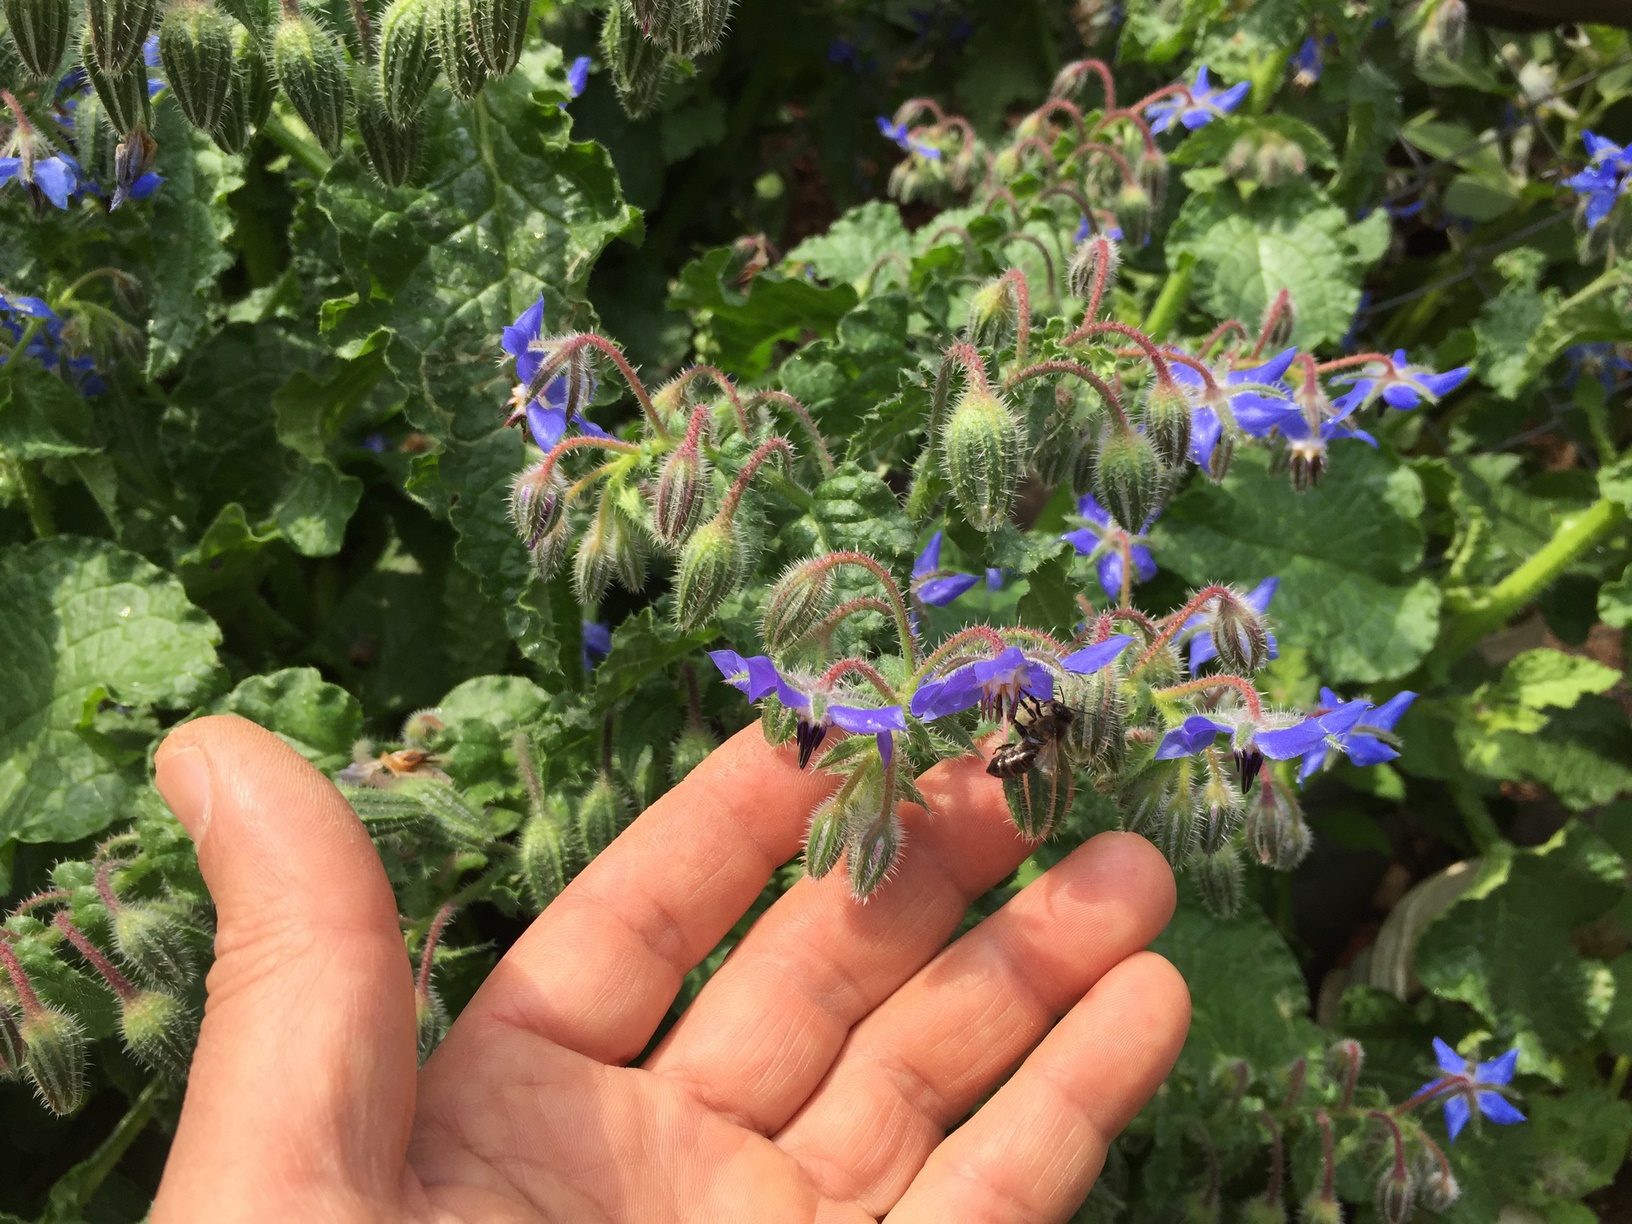 Borage is so popular with bees and other beneficial insects to the garden, which means it helps ensure tomato plants are well pollinated.